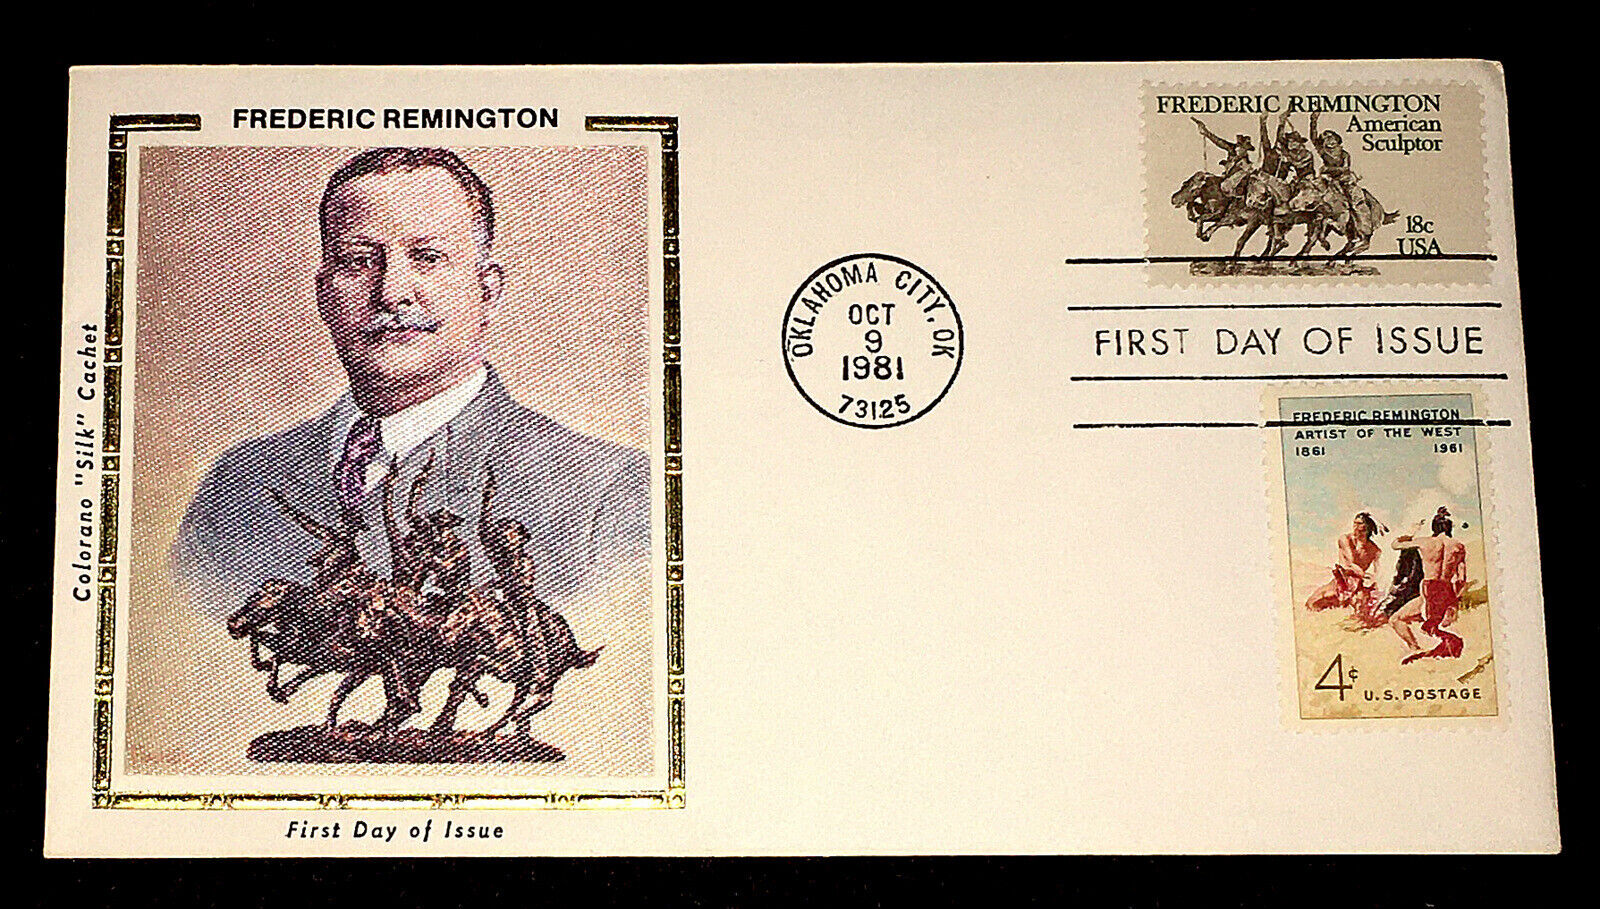 FREDERIC REMINGTON 1981 AMERICAN SCULPTOR SILK FIRST DAY COVER + 1961 STAMP